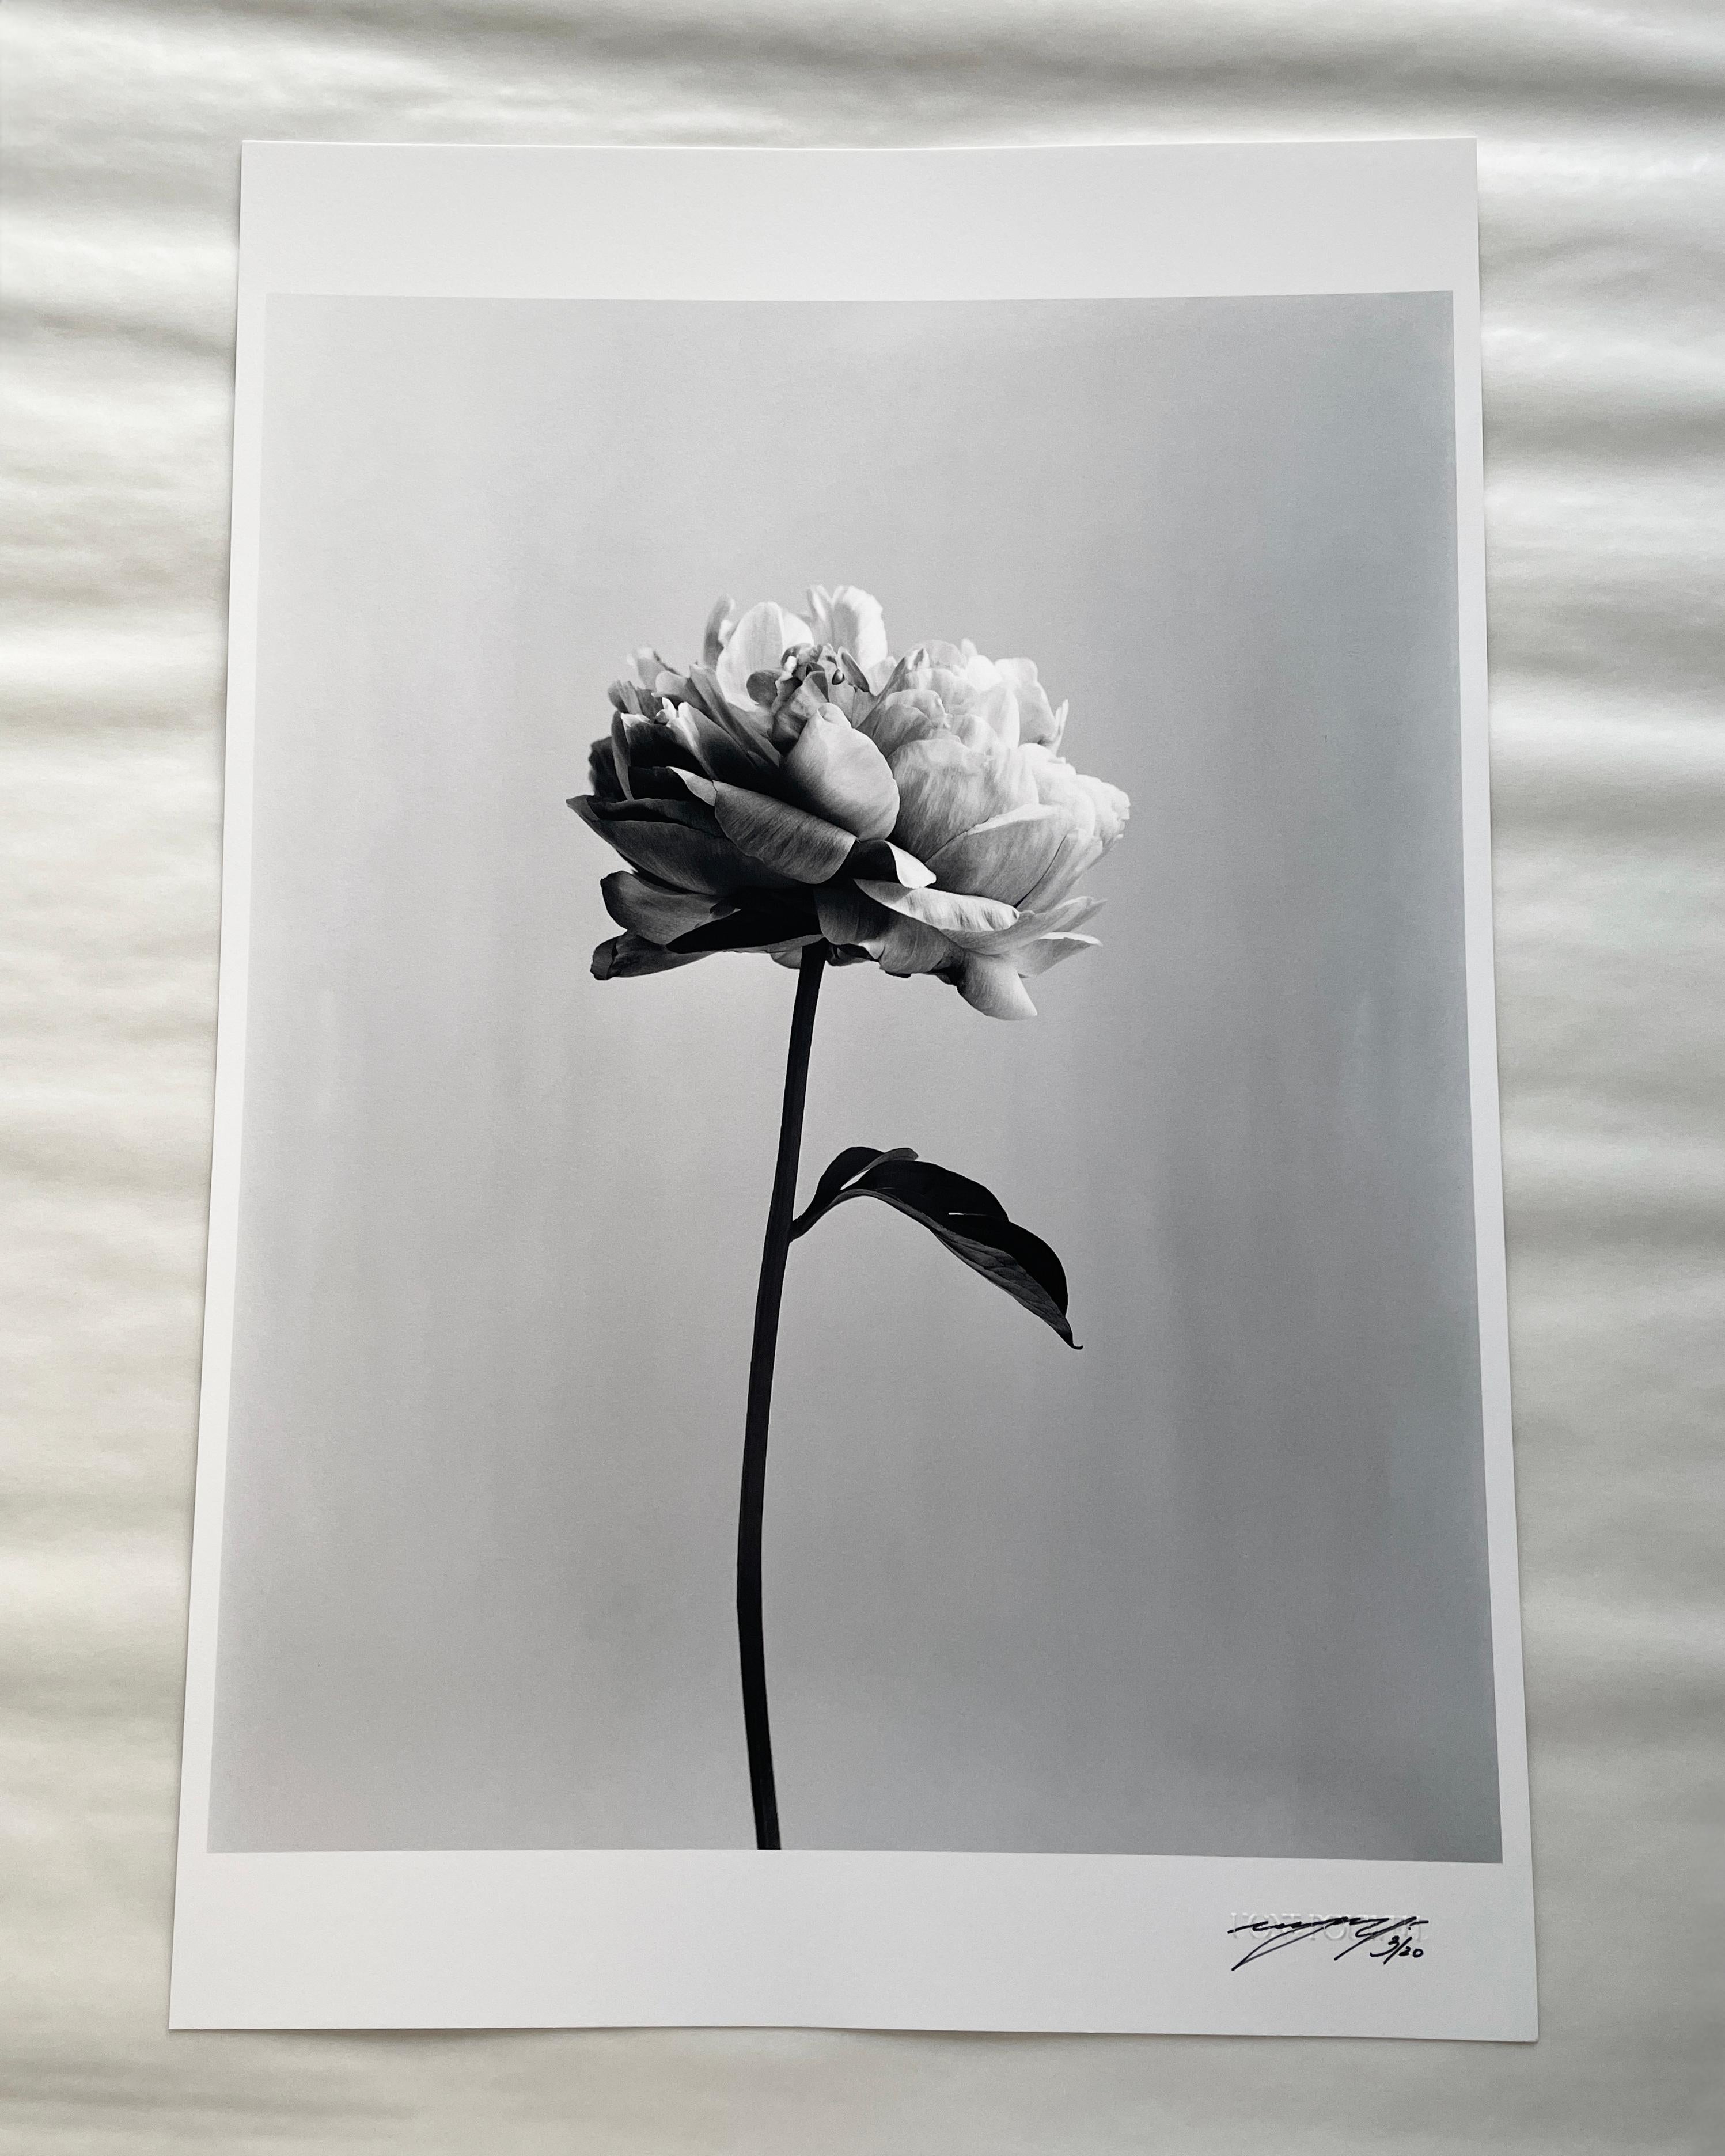 Peony no.3 - analogue black and white floral photography, Limited edition of 20 - Photograph by Ugne Pouwell